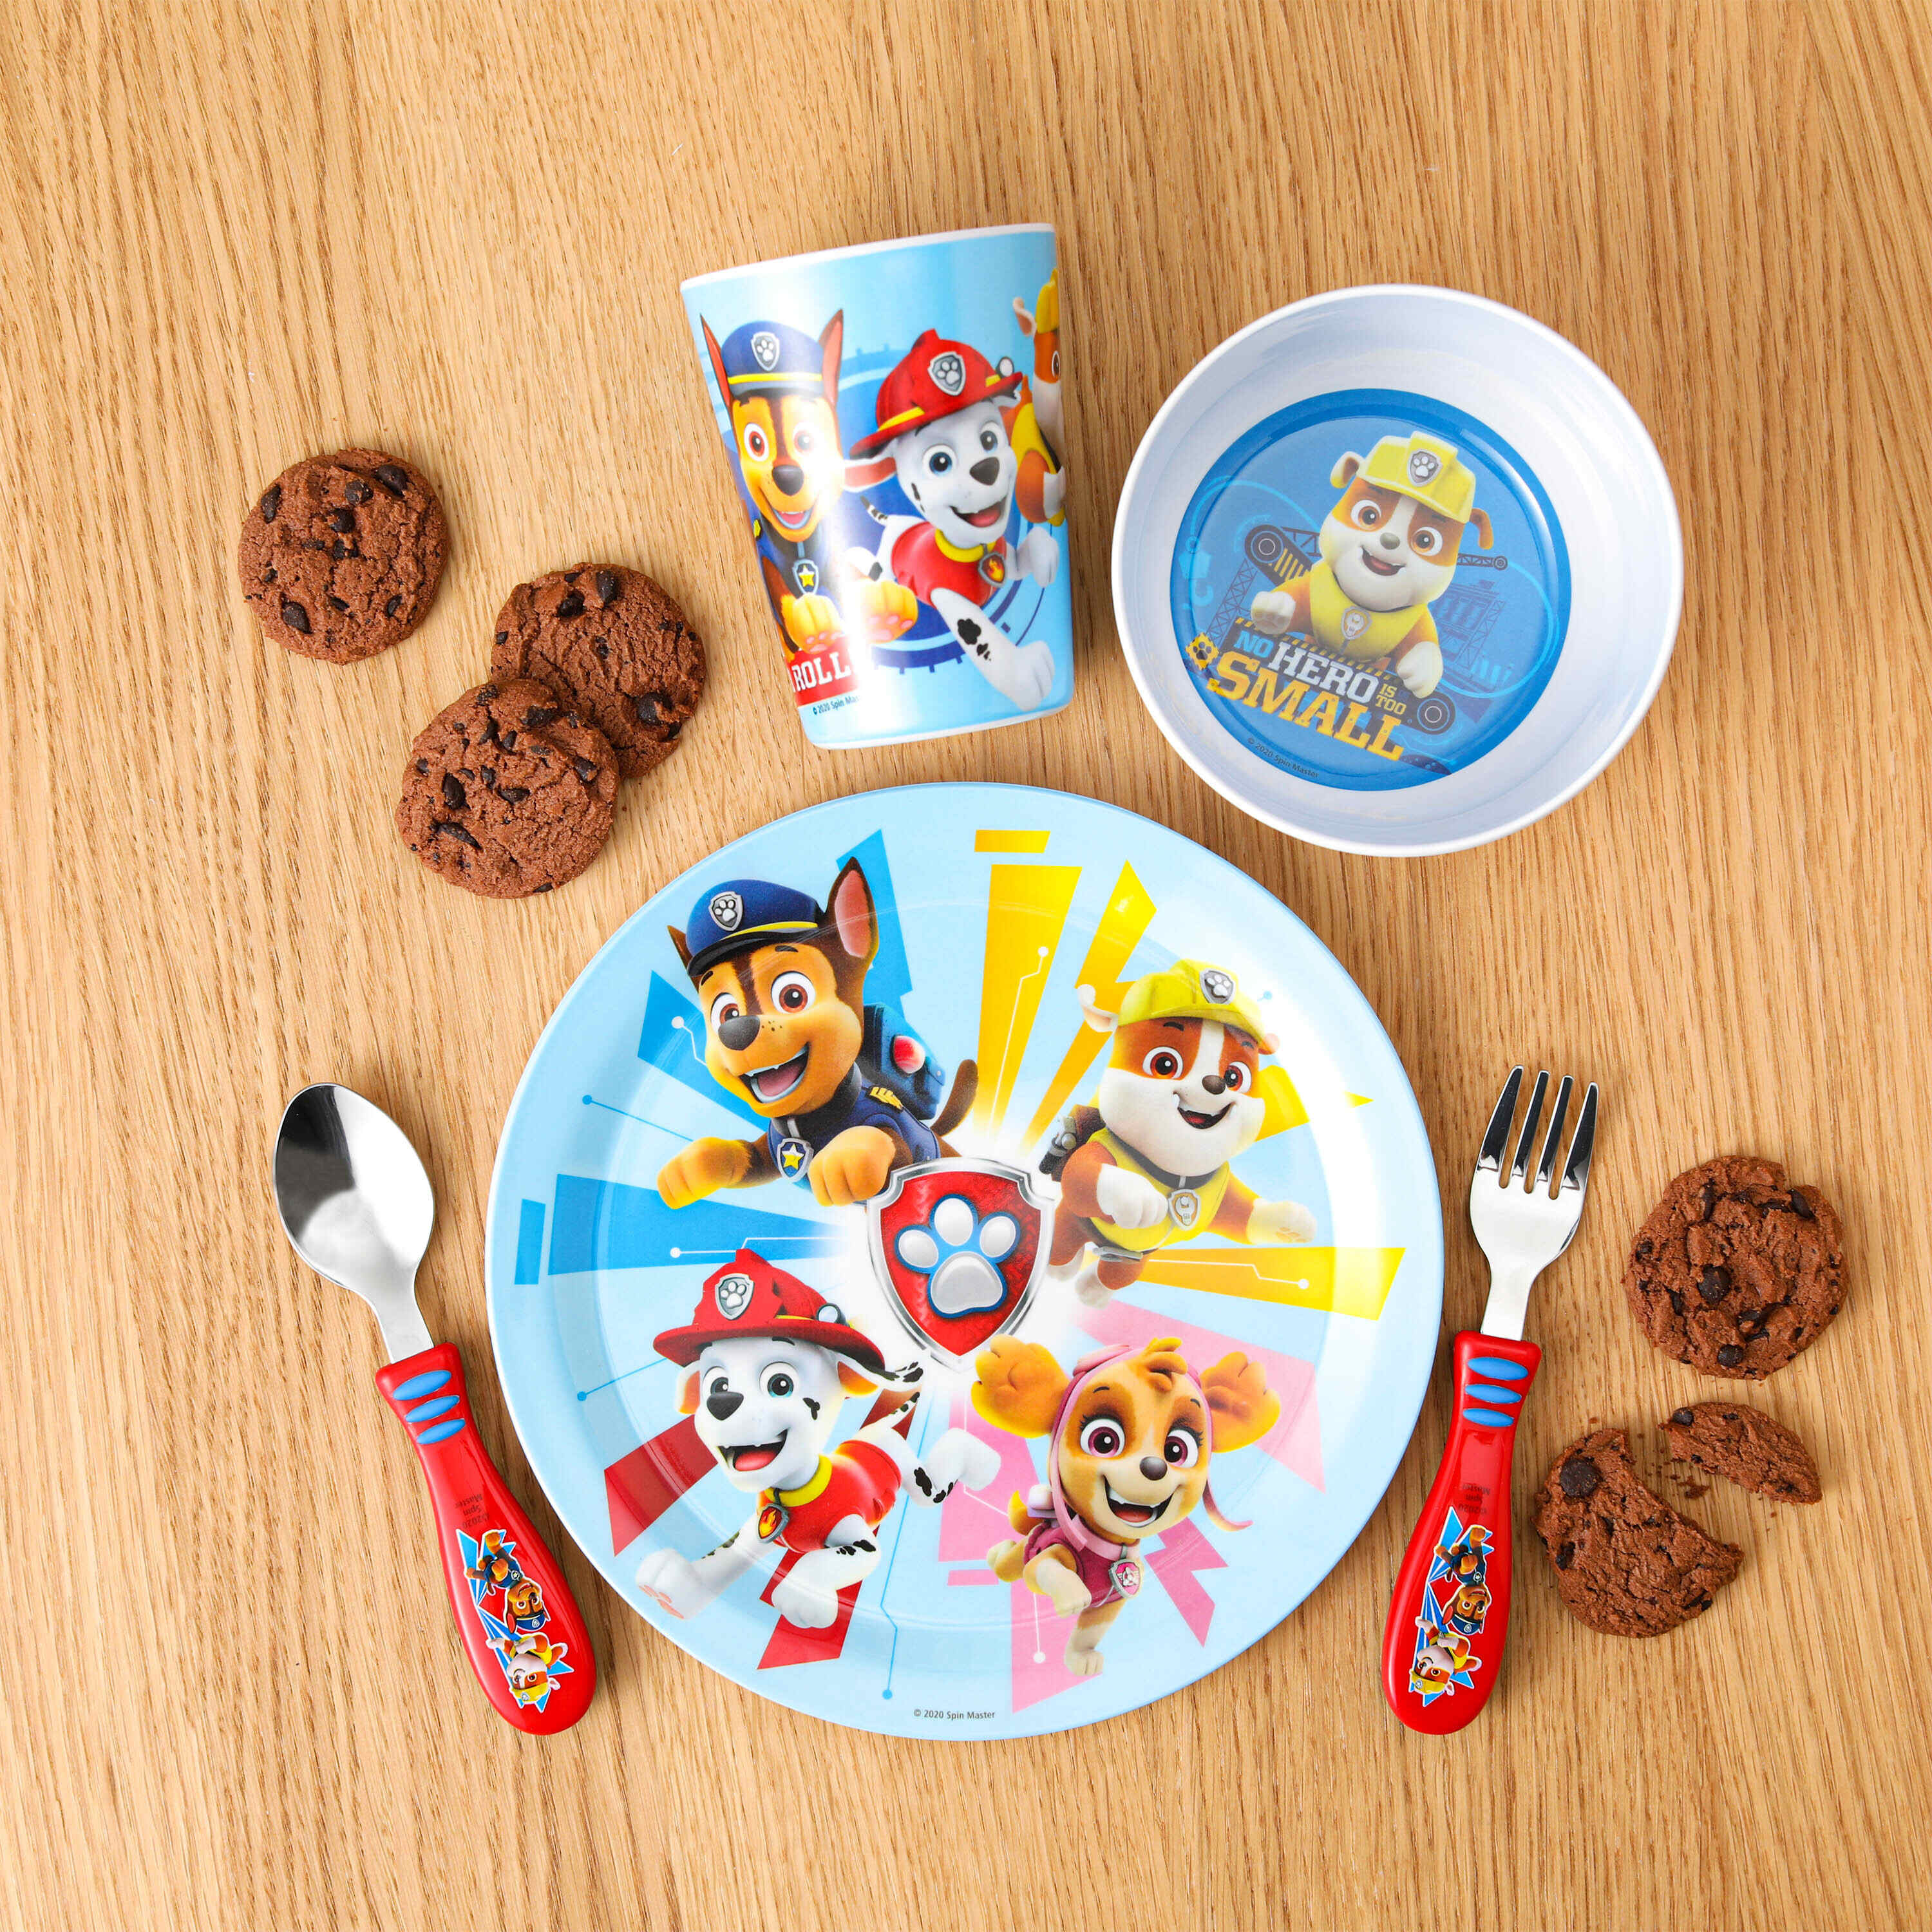 Water Bottle Non-BPA Made of Durable Material and Perfect for Kids Bowl and Utensil Tableware Zak Designs Paw Patrol Dinnerware 5 Piece Set Includes Plate 